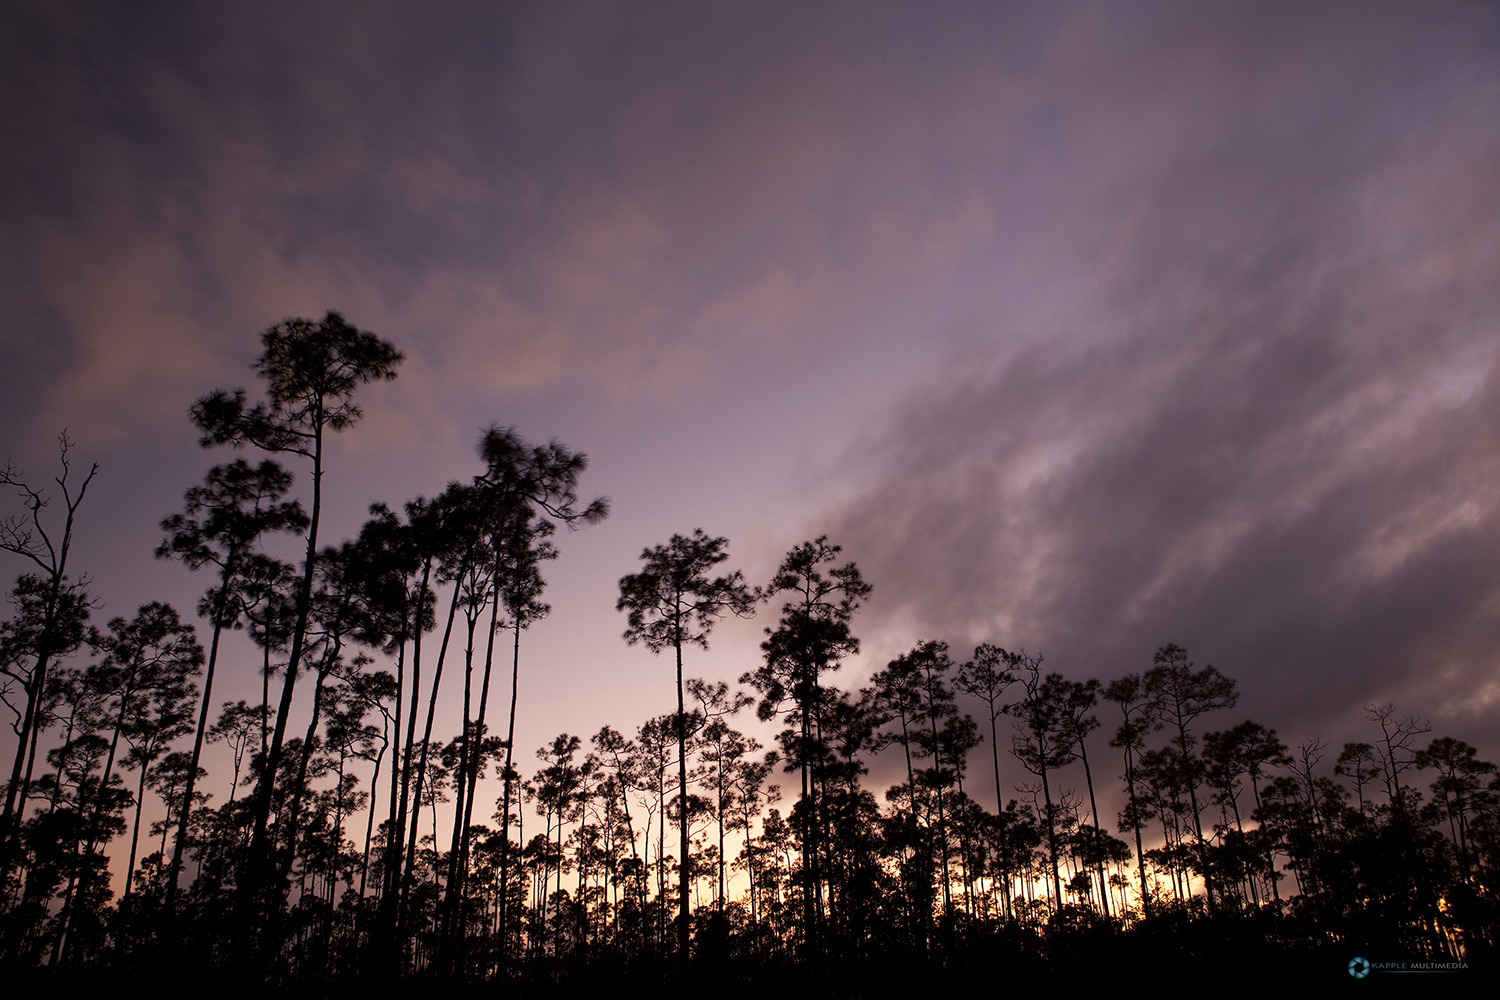 Pine trees silhouetted against Sunset sky at the Everglades National Park, Florida, USA